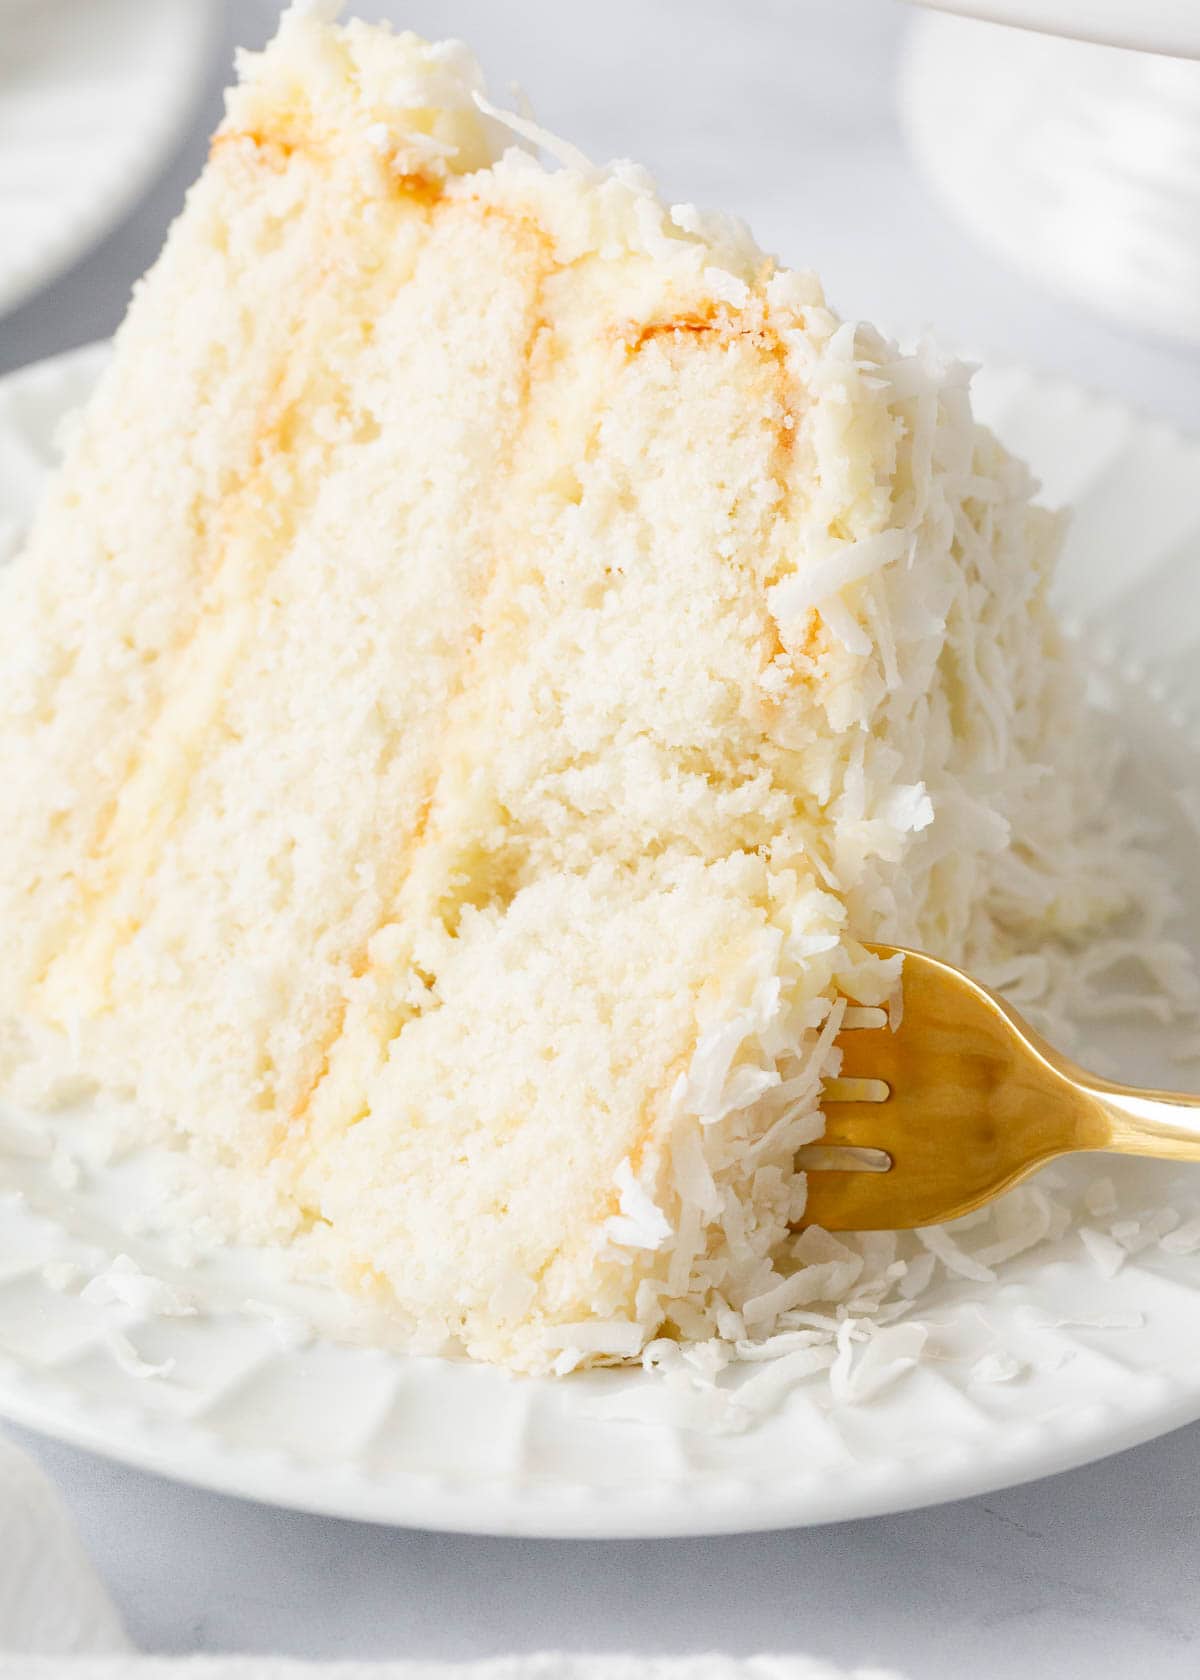 Taking a bite of coconut cake on a white plate.